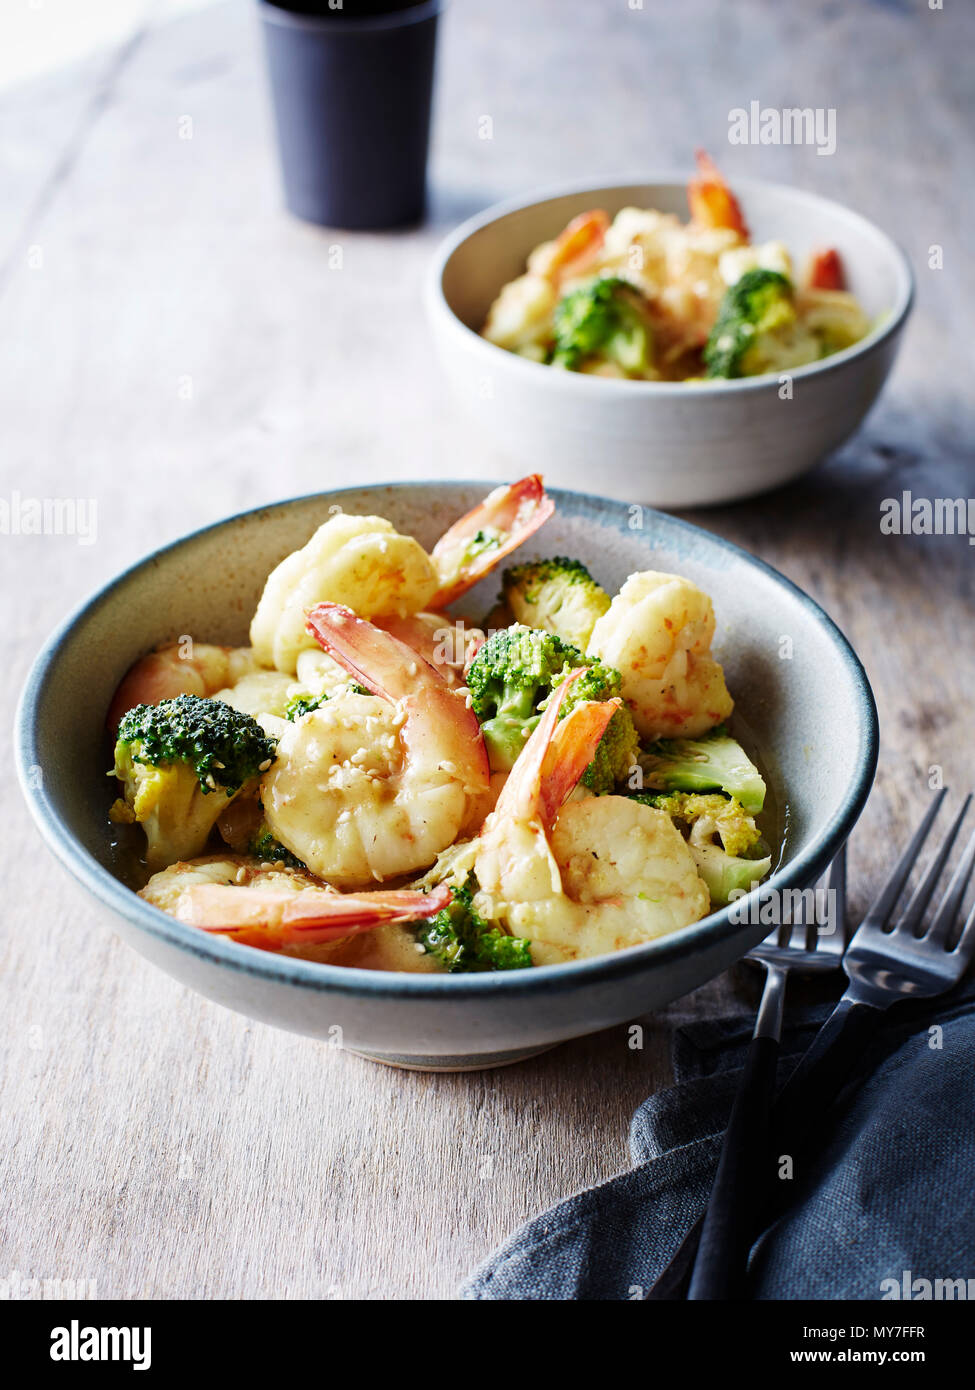 Still life with bowls of chinese mustard prawns and broccoli Stock Photo